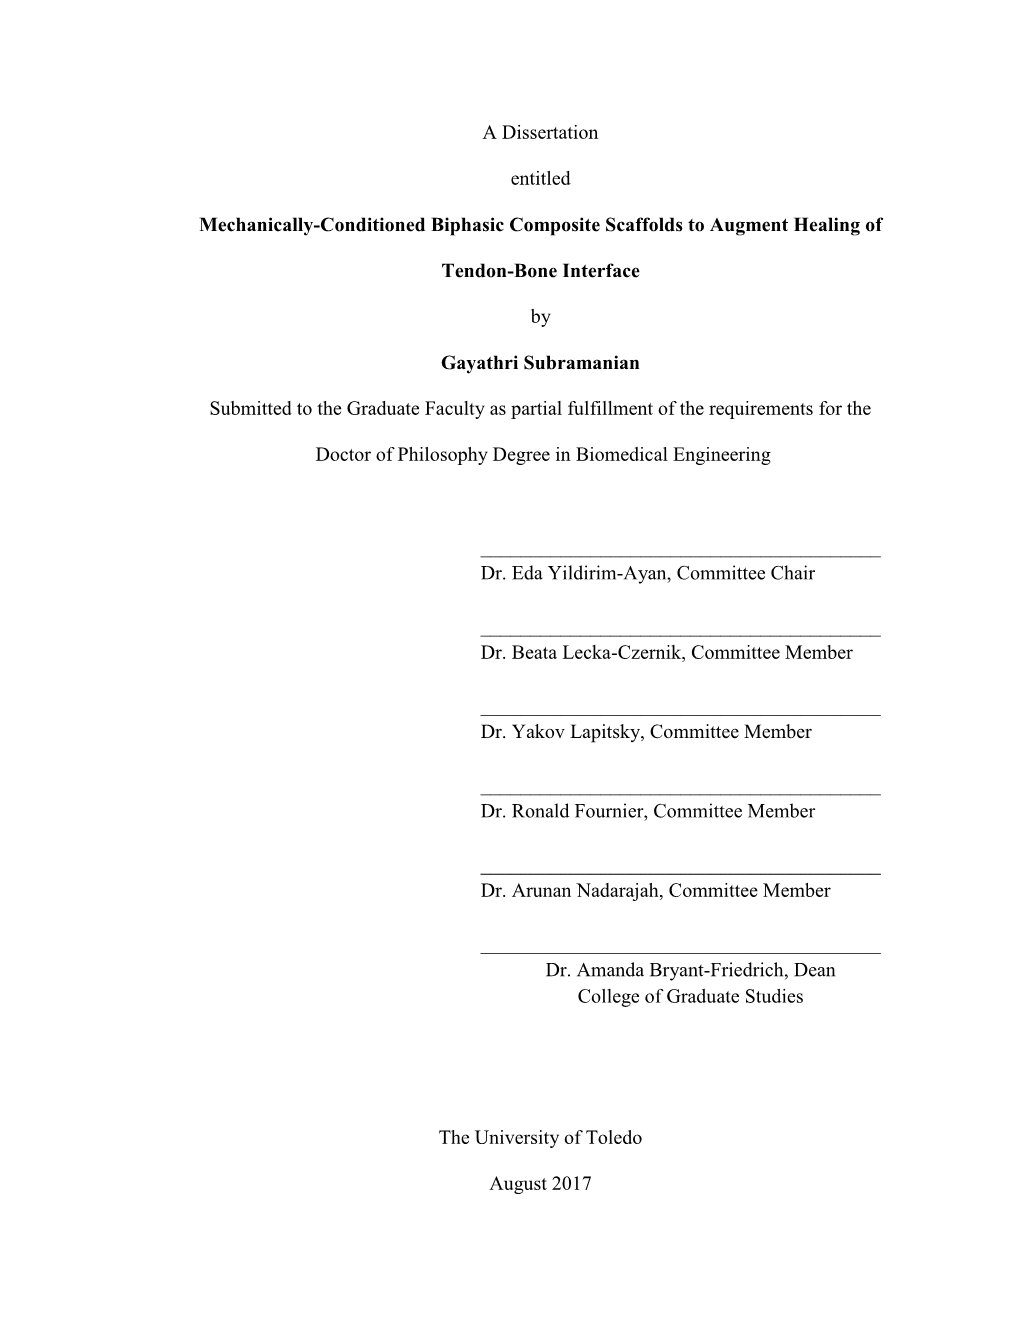 A Dissertation Entitled Mechanically-Conditioned Biphasic